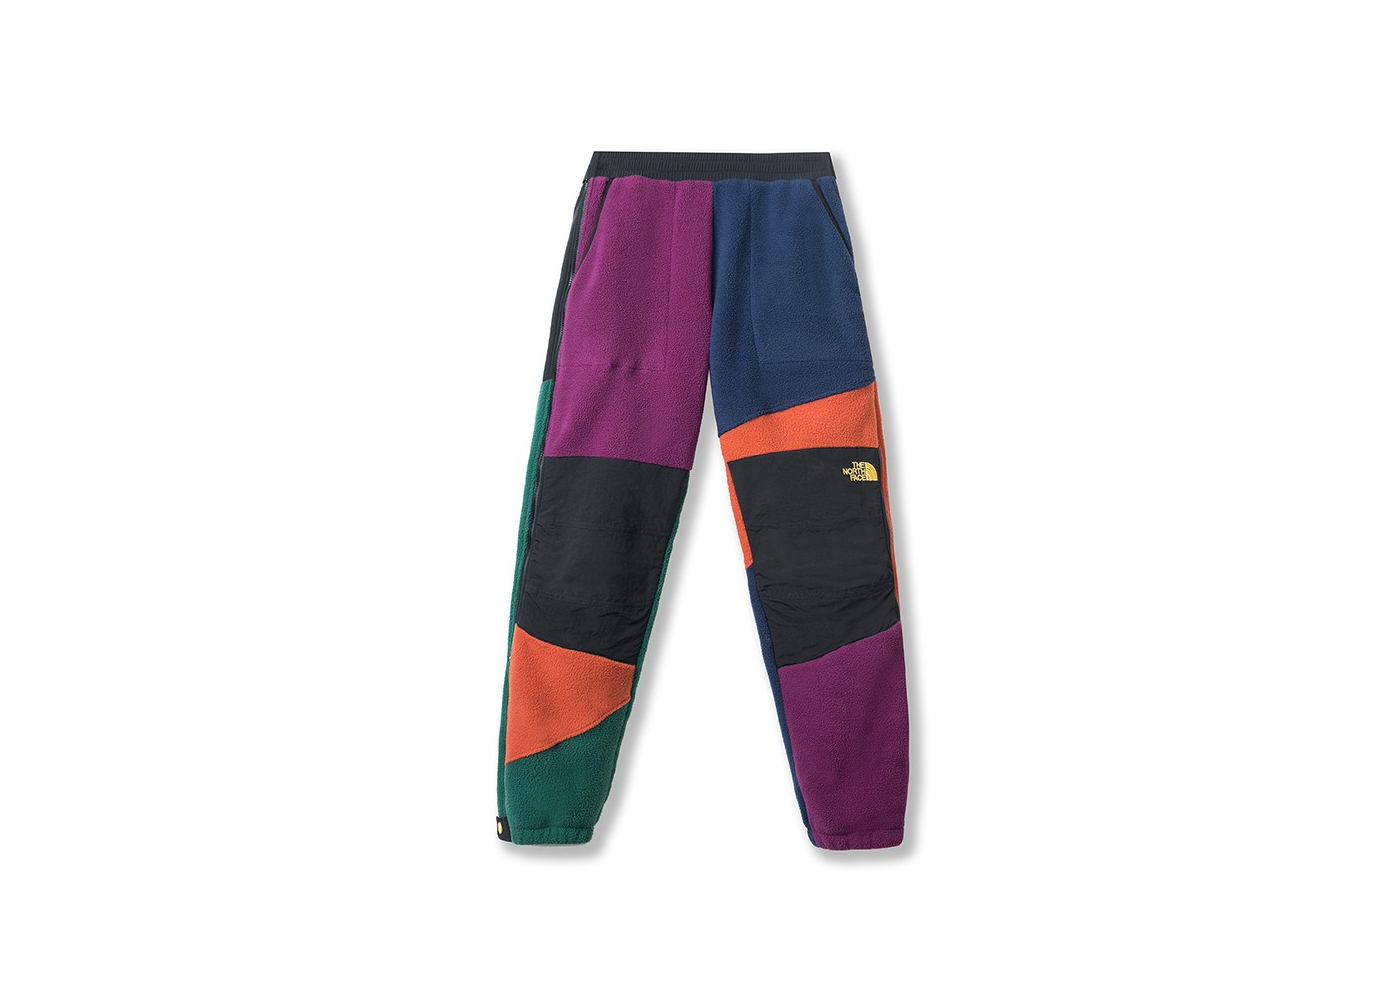 North Face Denali Pant Factory Sale, 58% OFF | www 